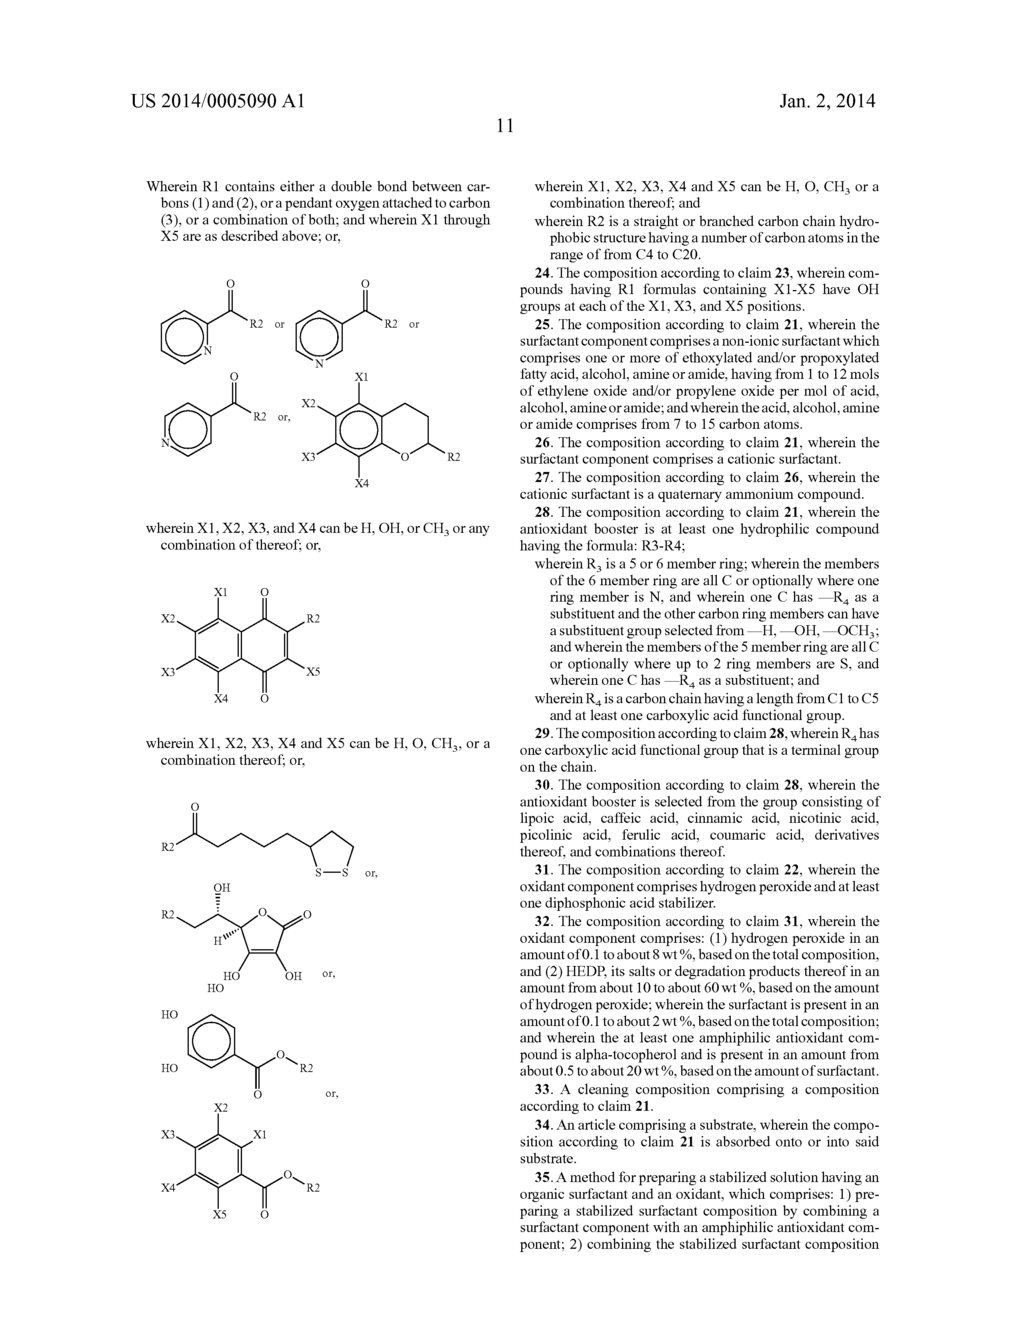 STABILIZATION OF SURFACTANTS AGAINST OXIDATIVE ATTACK - diagram, schematic, and image 19